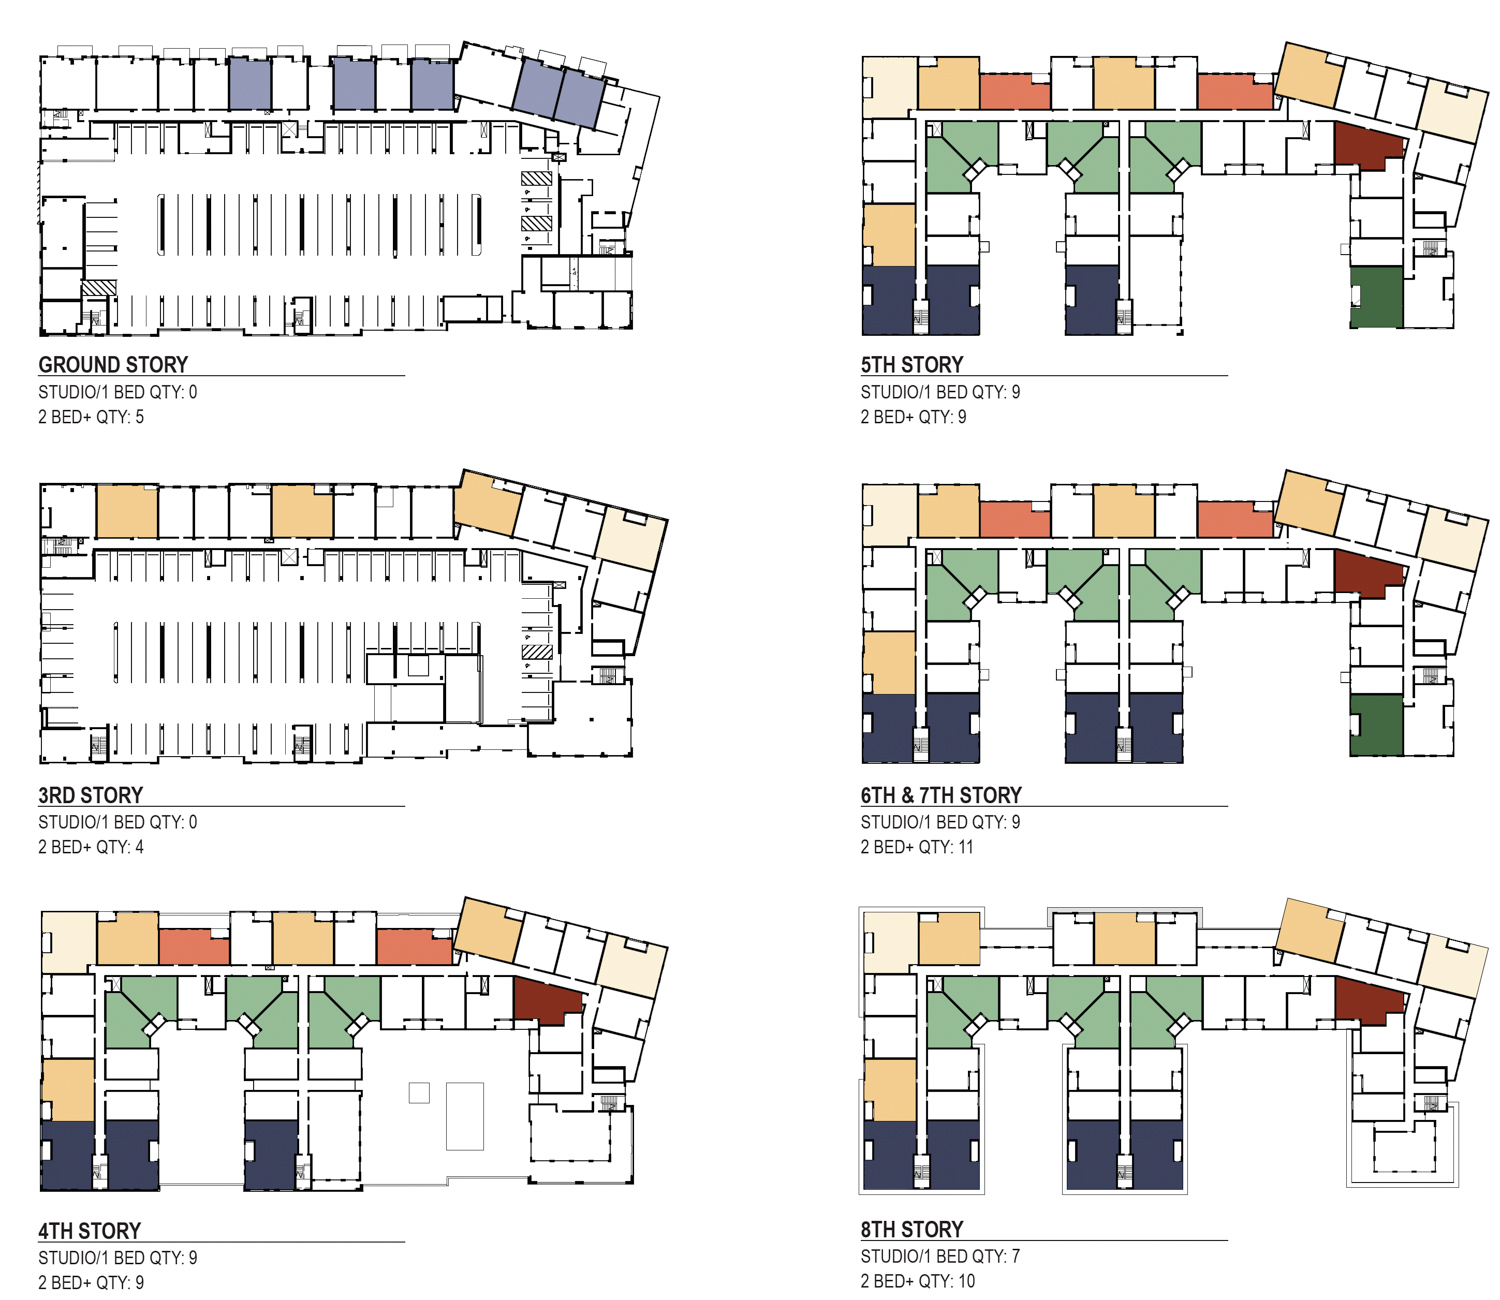 1150 Kifer Road floor plans, illustration by Jones and BDE Architecture